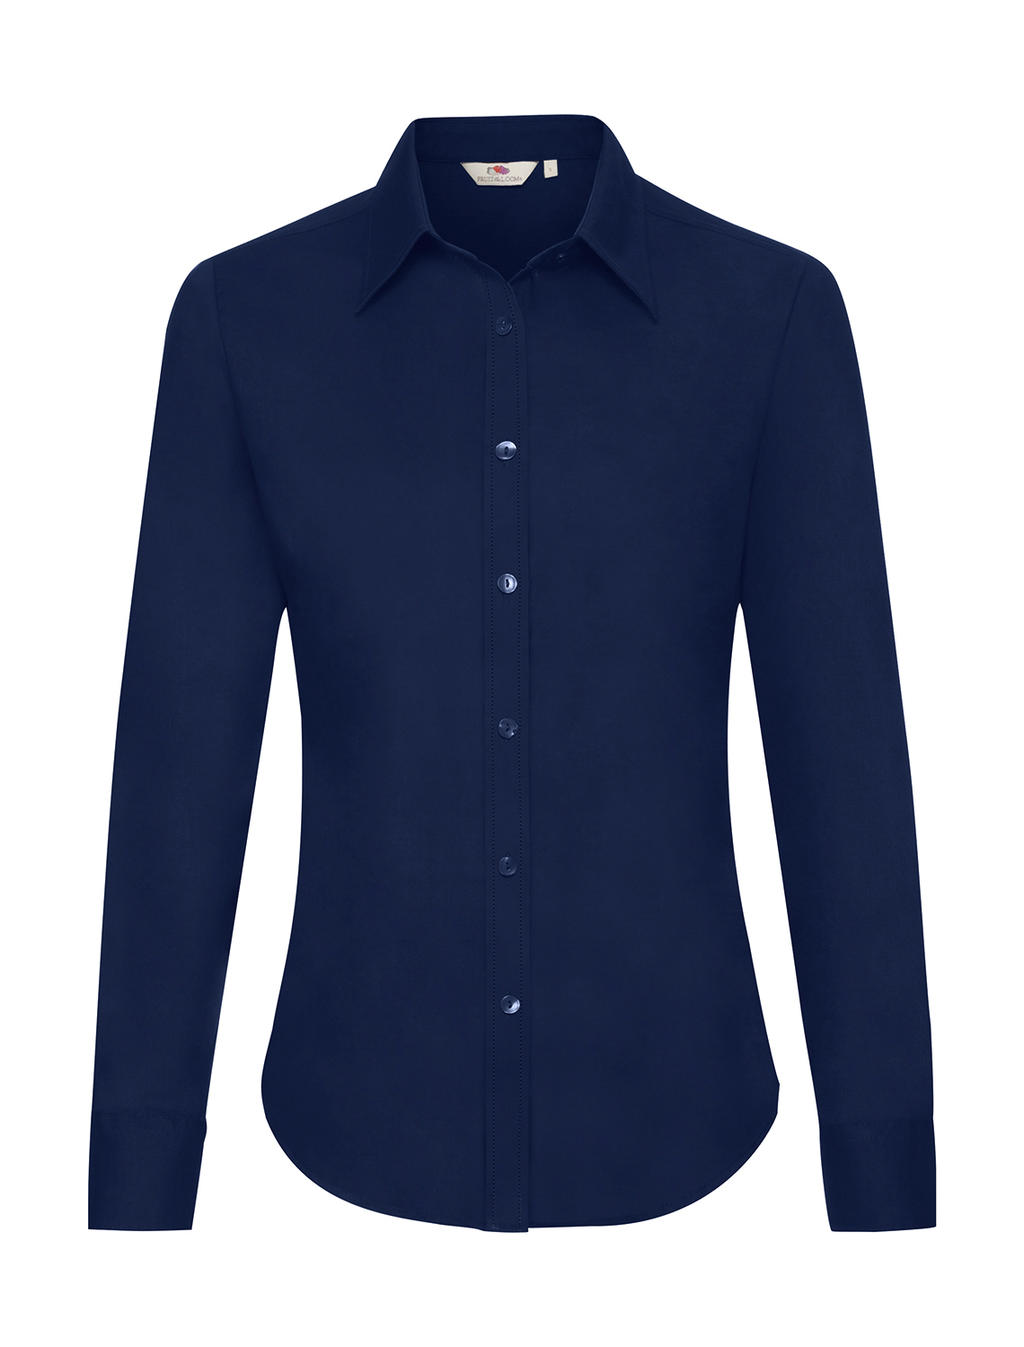  Ladies Oxford Shirt LS in Farbe Navy